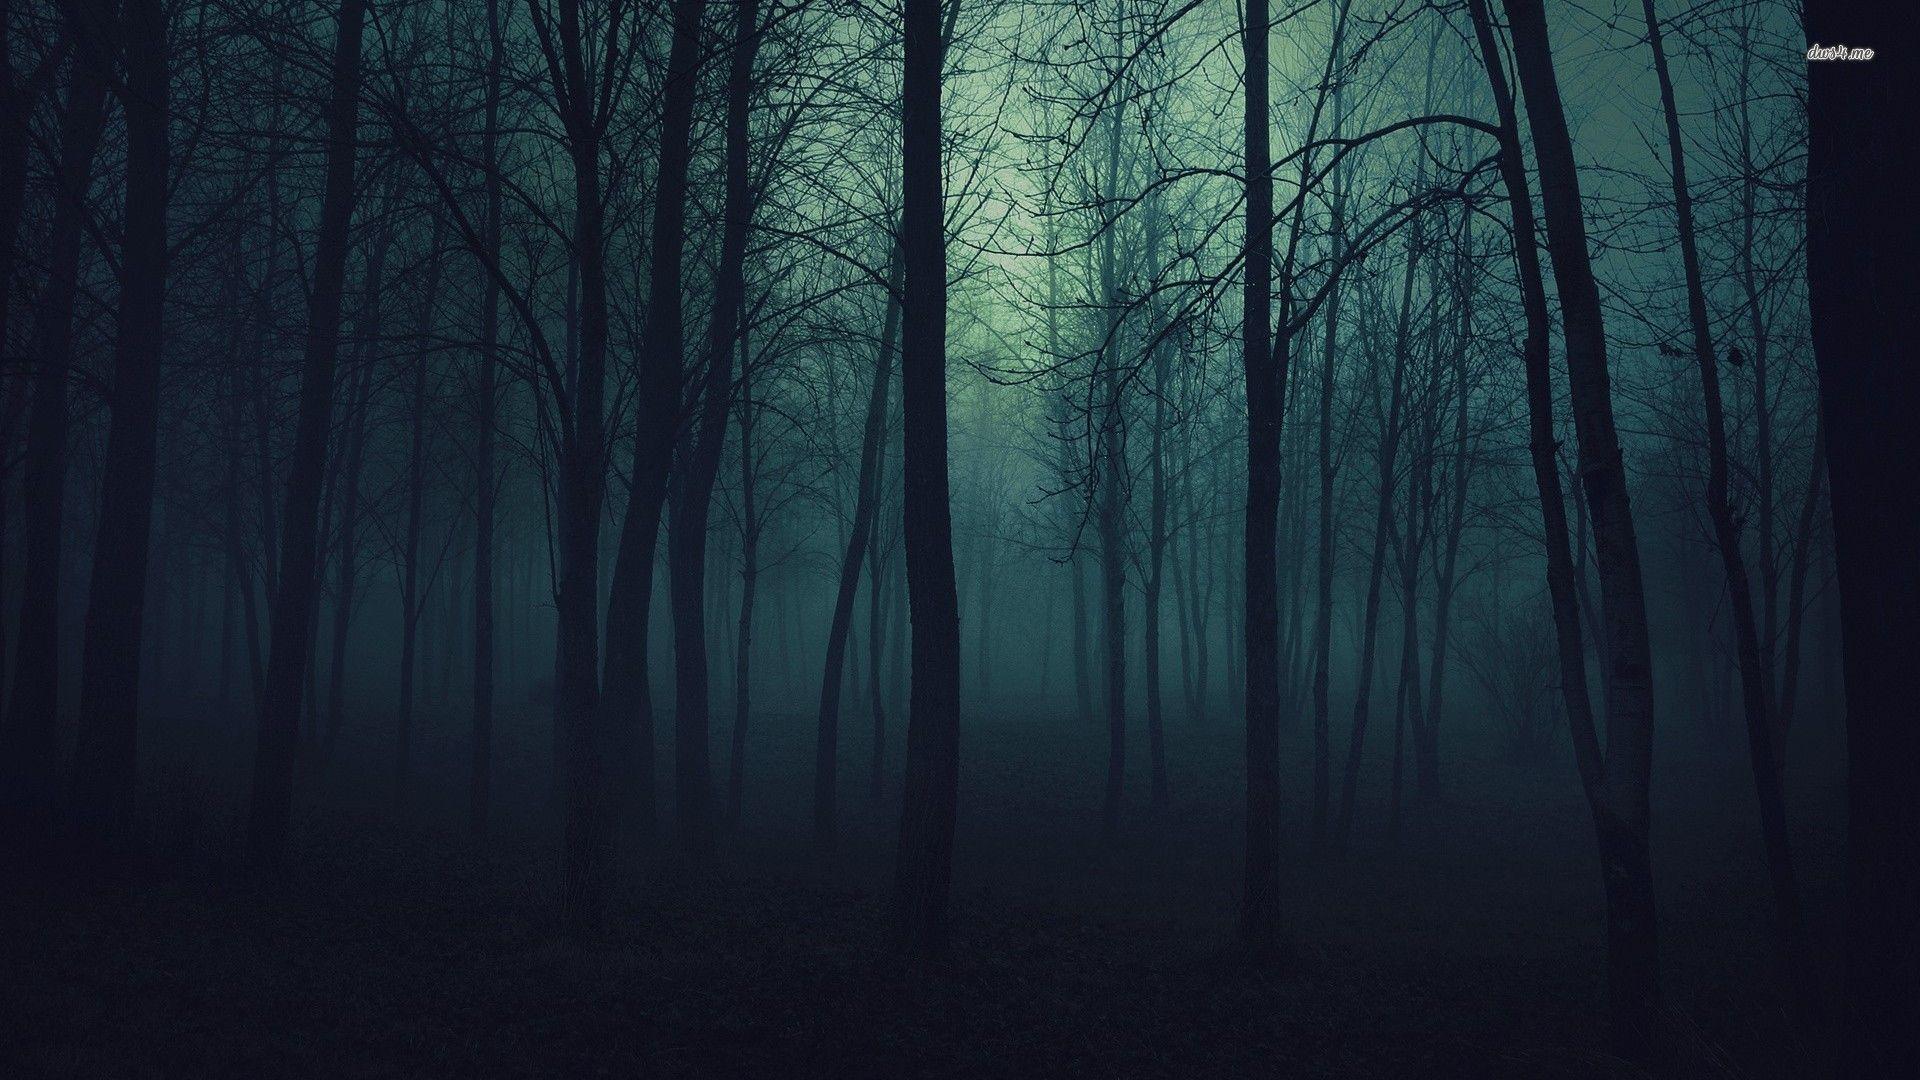 Collection of Spooky Forest Wallpaper (image in Collection)